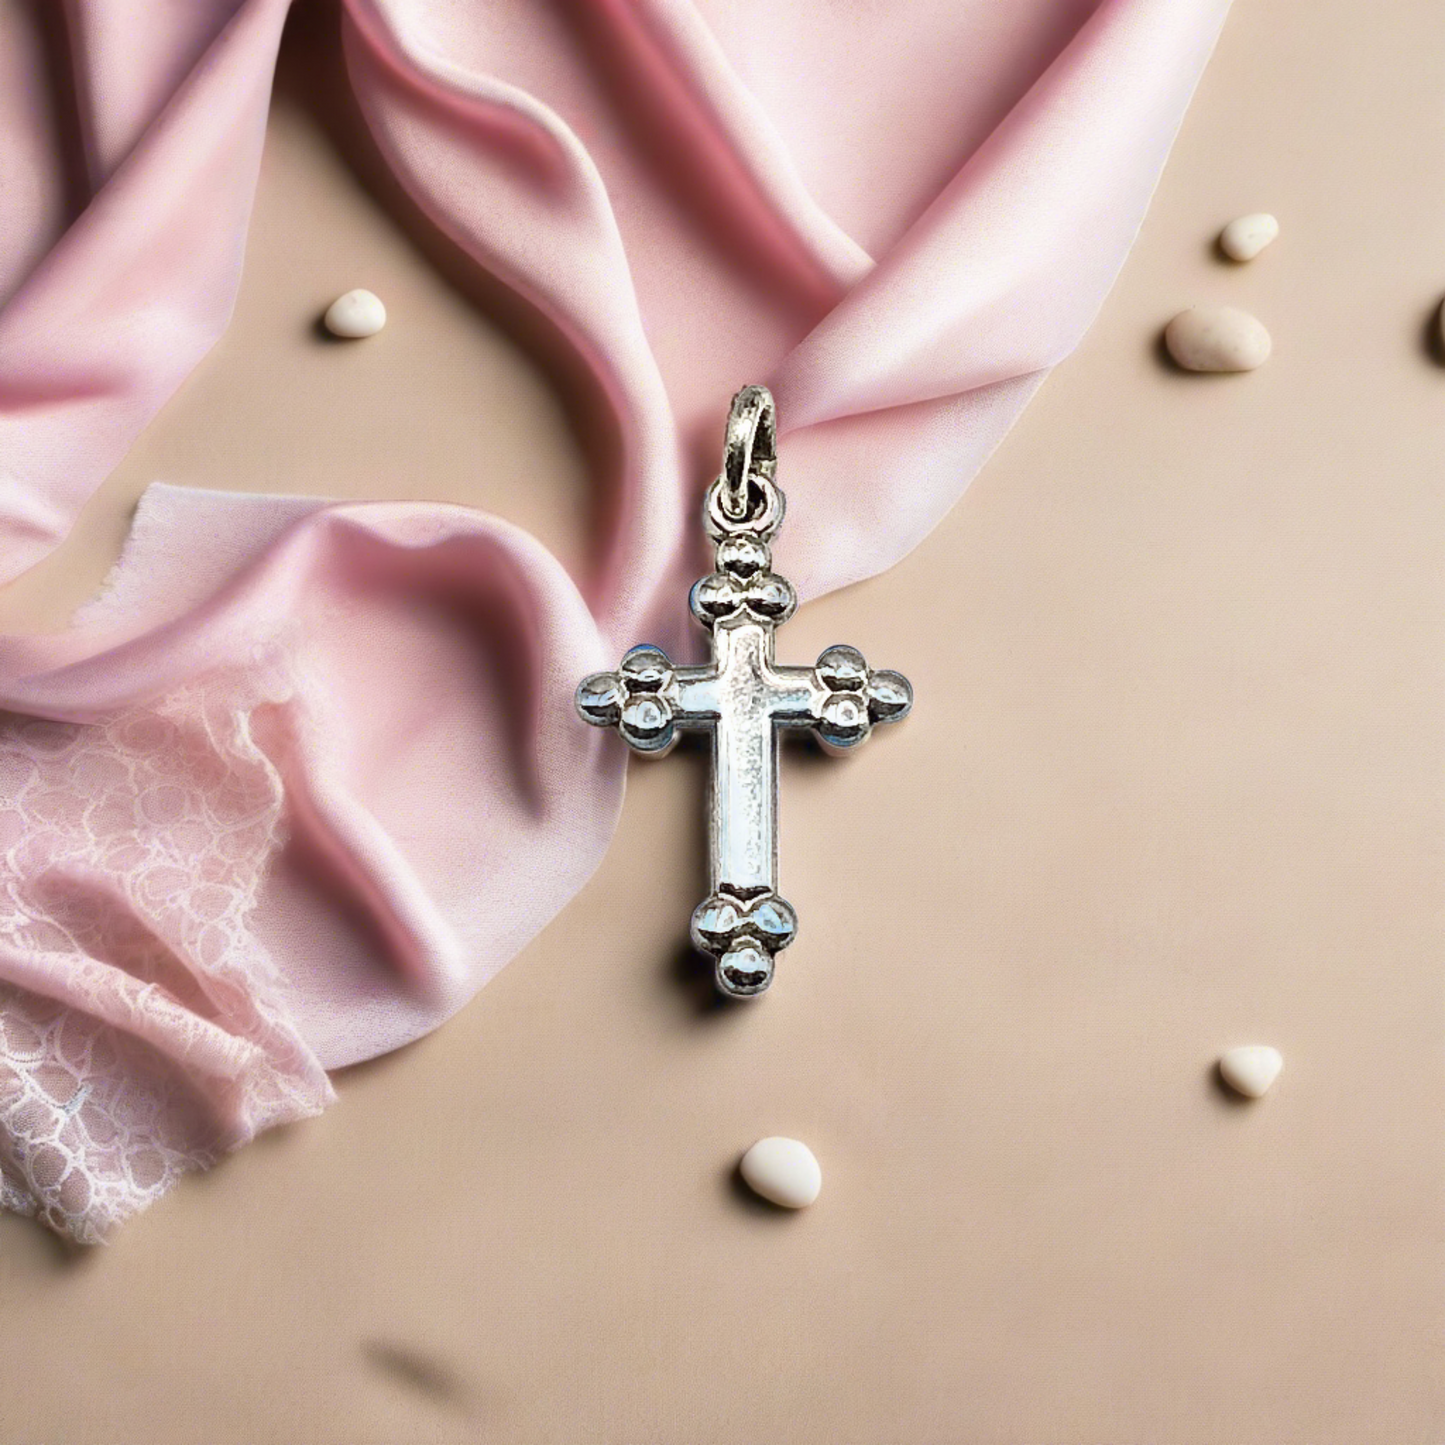 Vintage Sterling Silver Cross Charm by Bliss